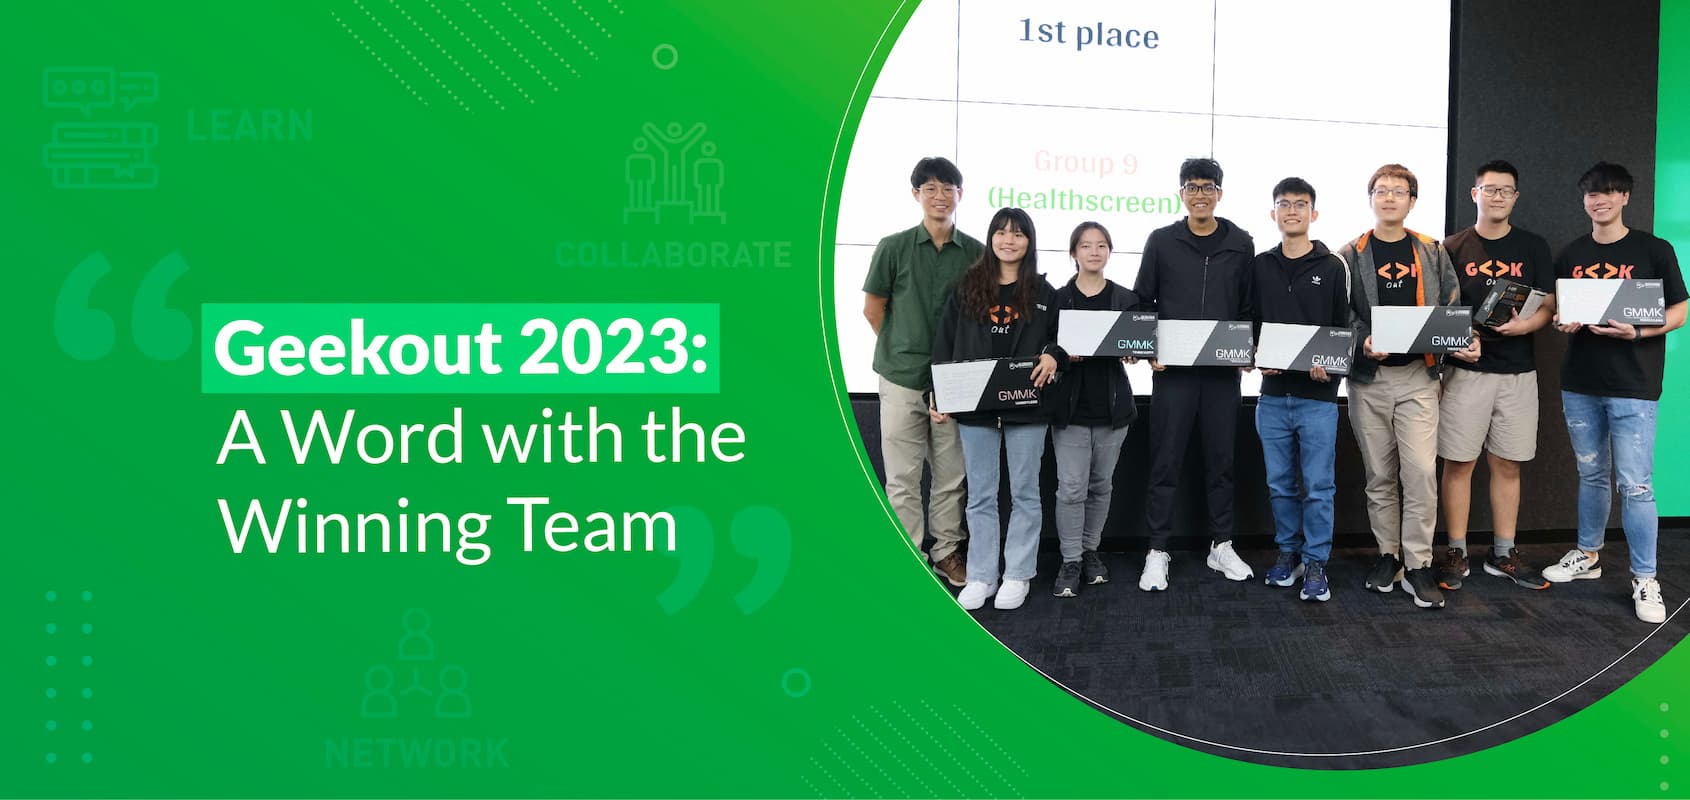 The winning team of Geekout 2023 – a boot camp for tech talent from tertiary institutions